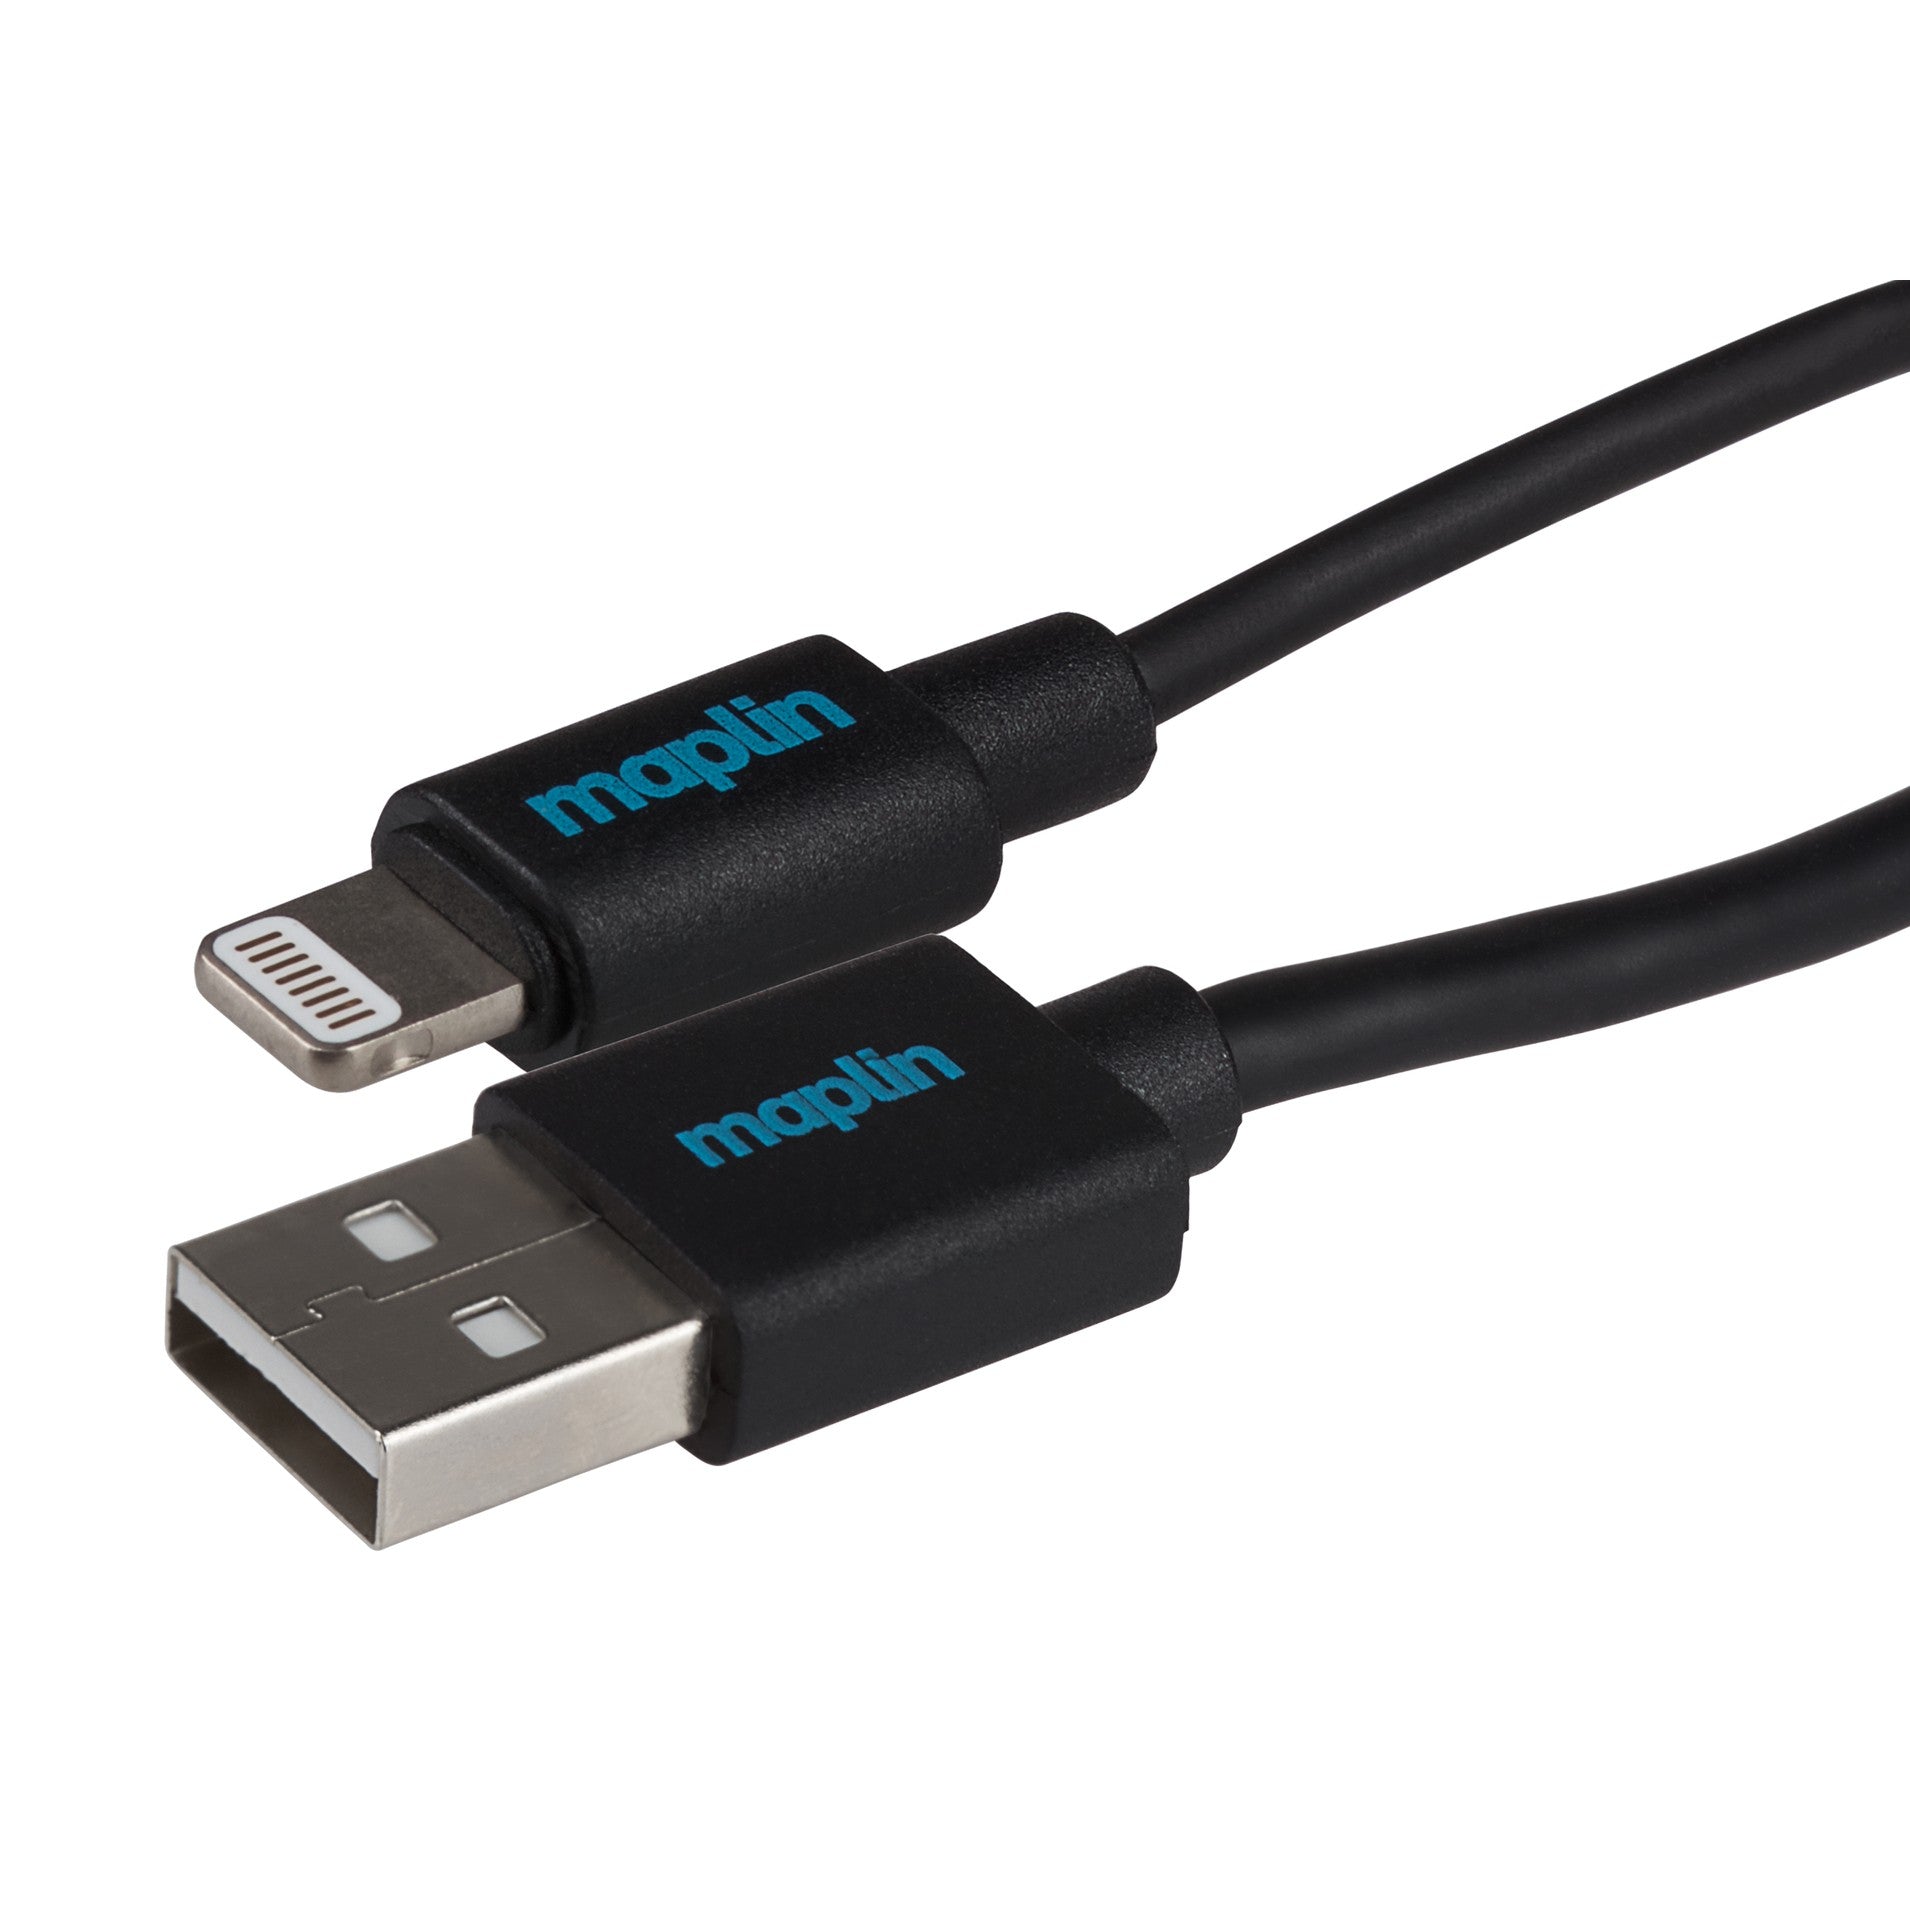 Lightning to USB Cable (0.5m)